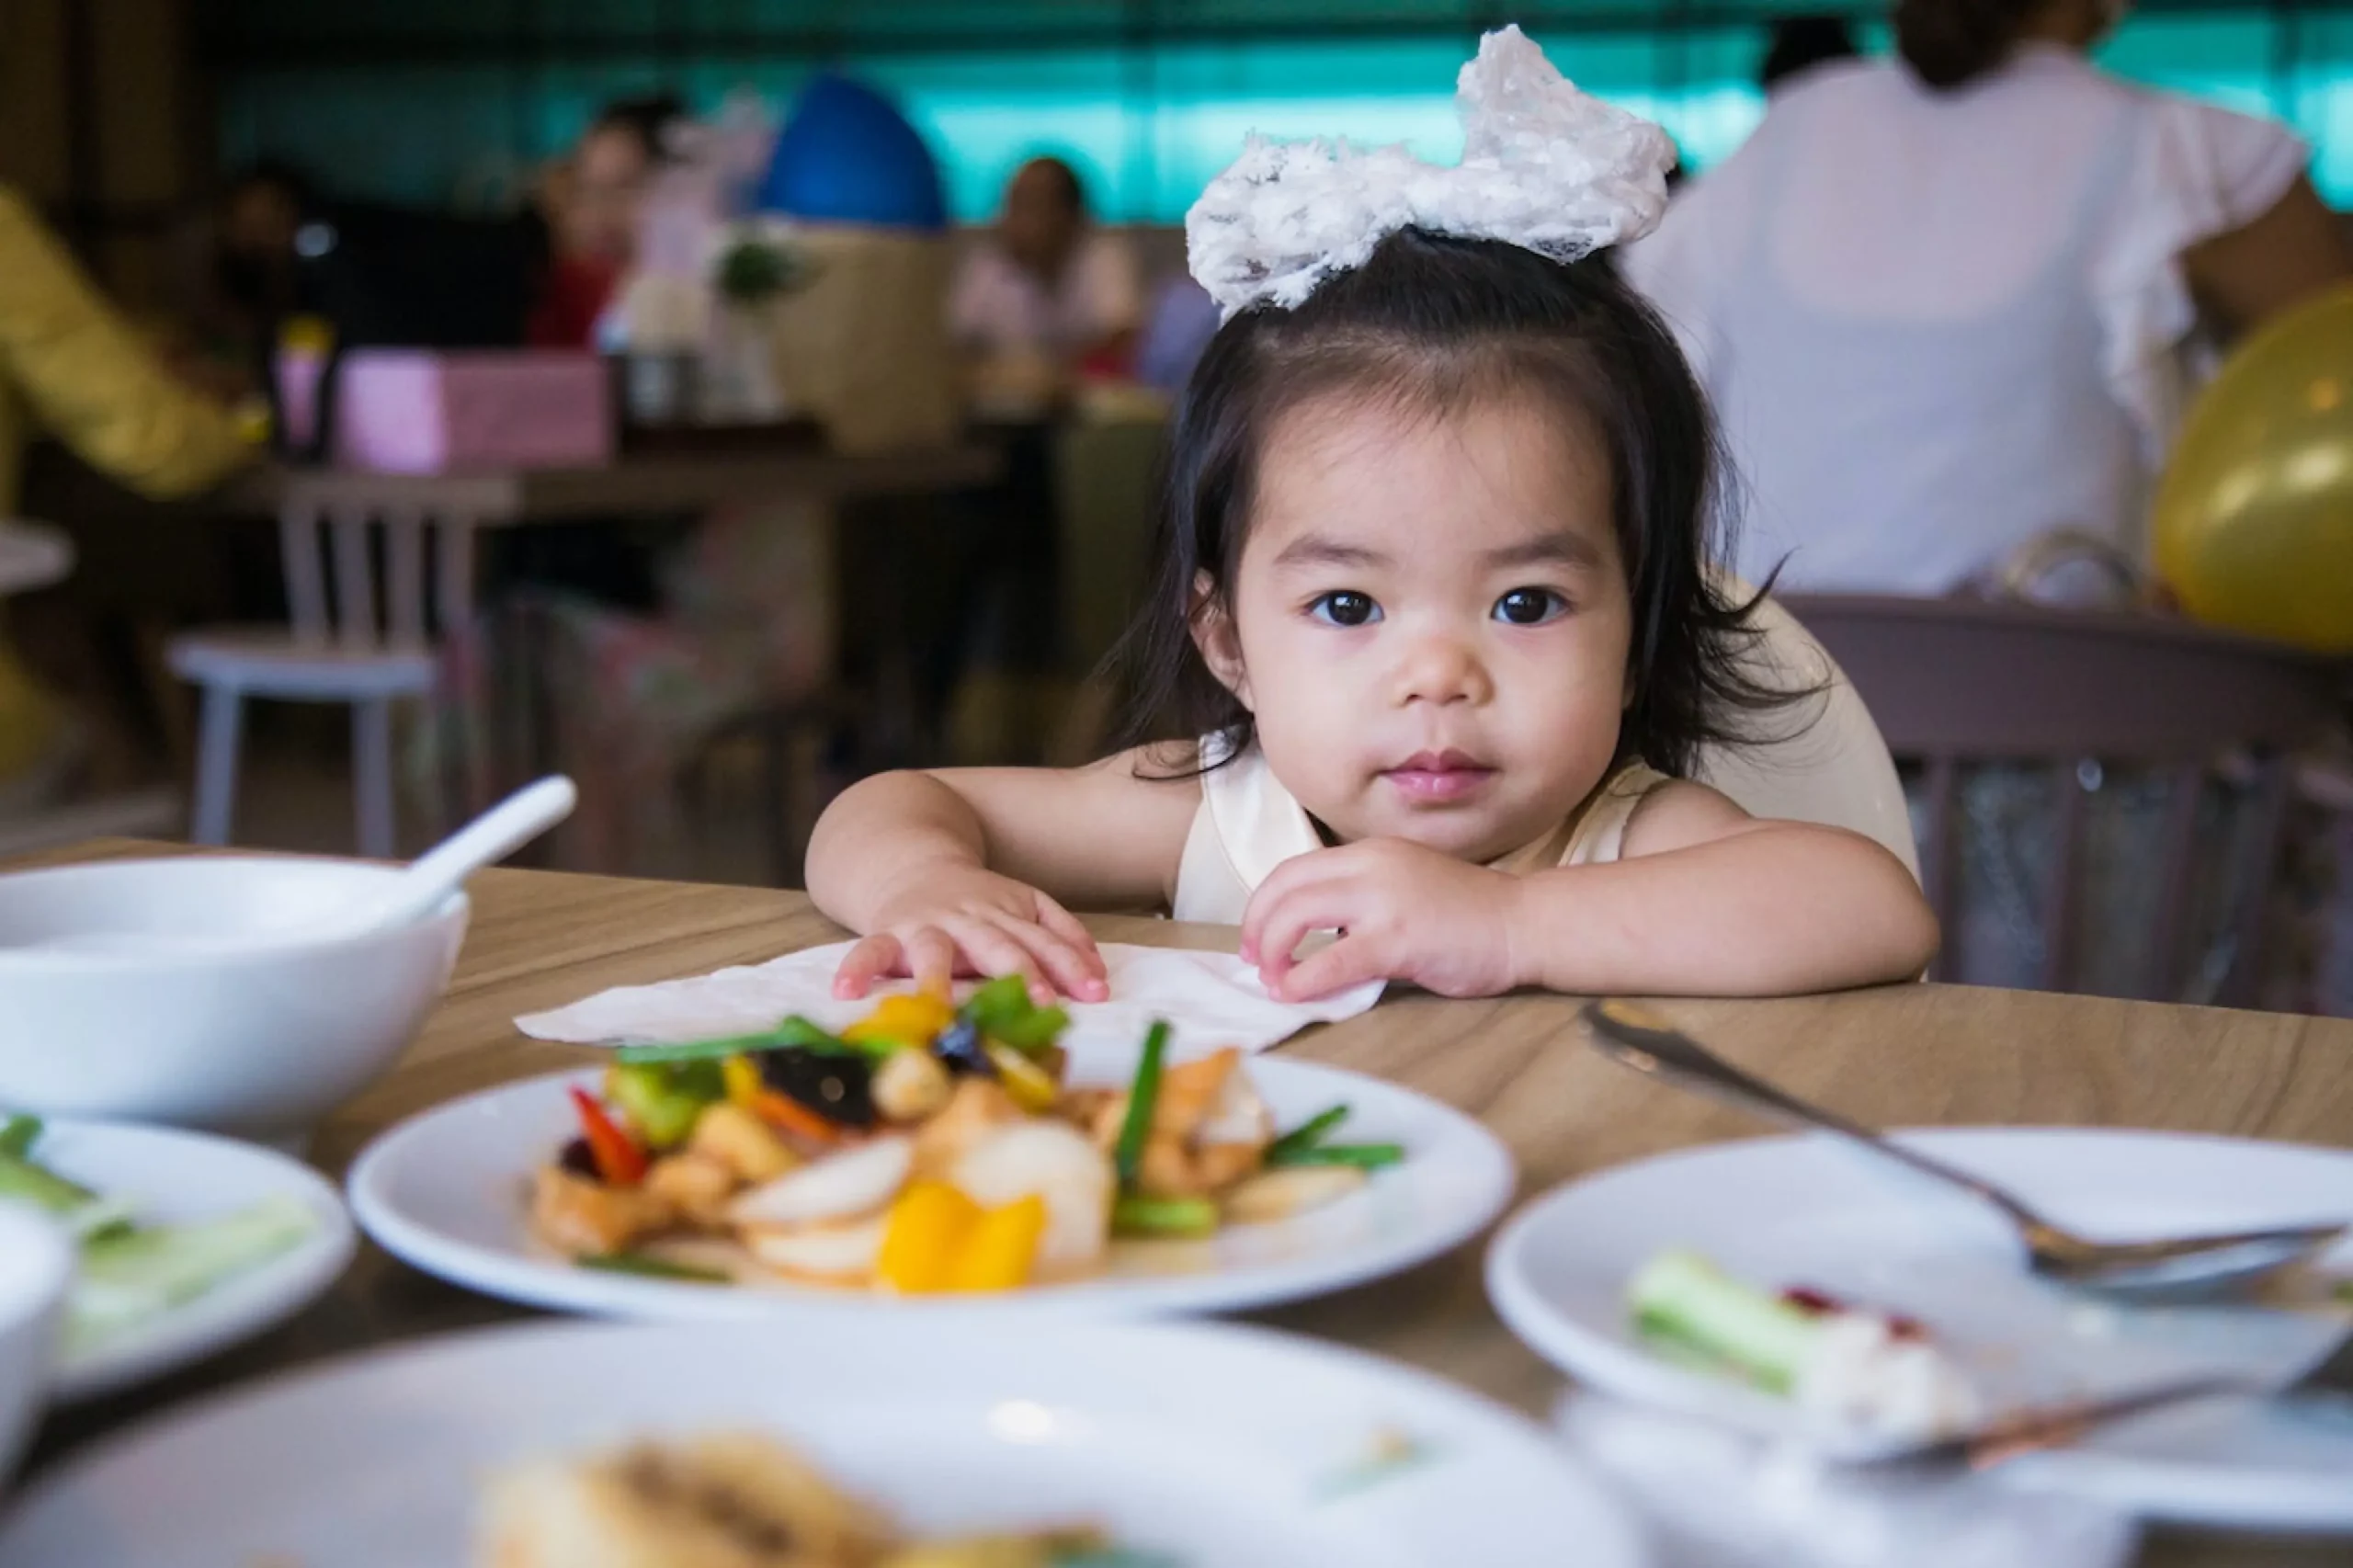 image of a child eating a meal in a restaurant